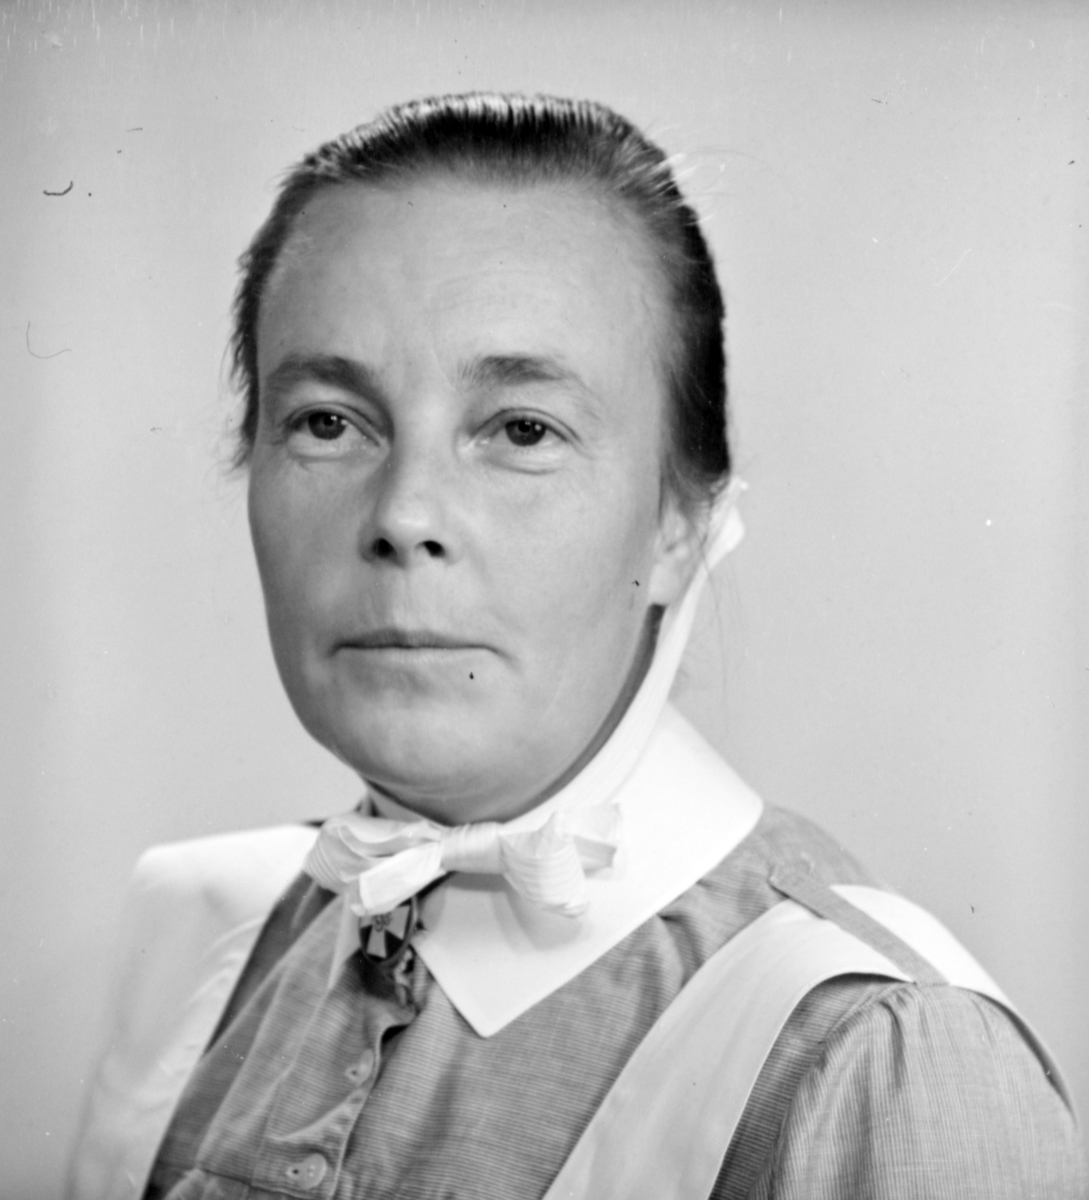 Syster Hilma, augusti 1944.